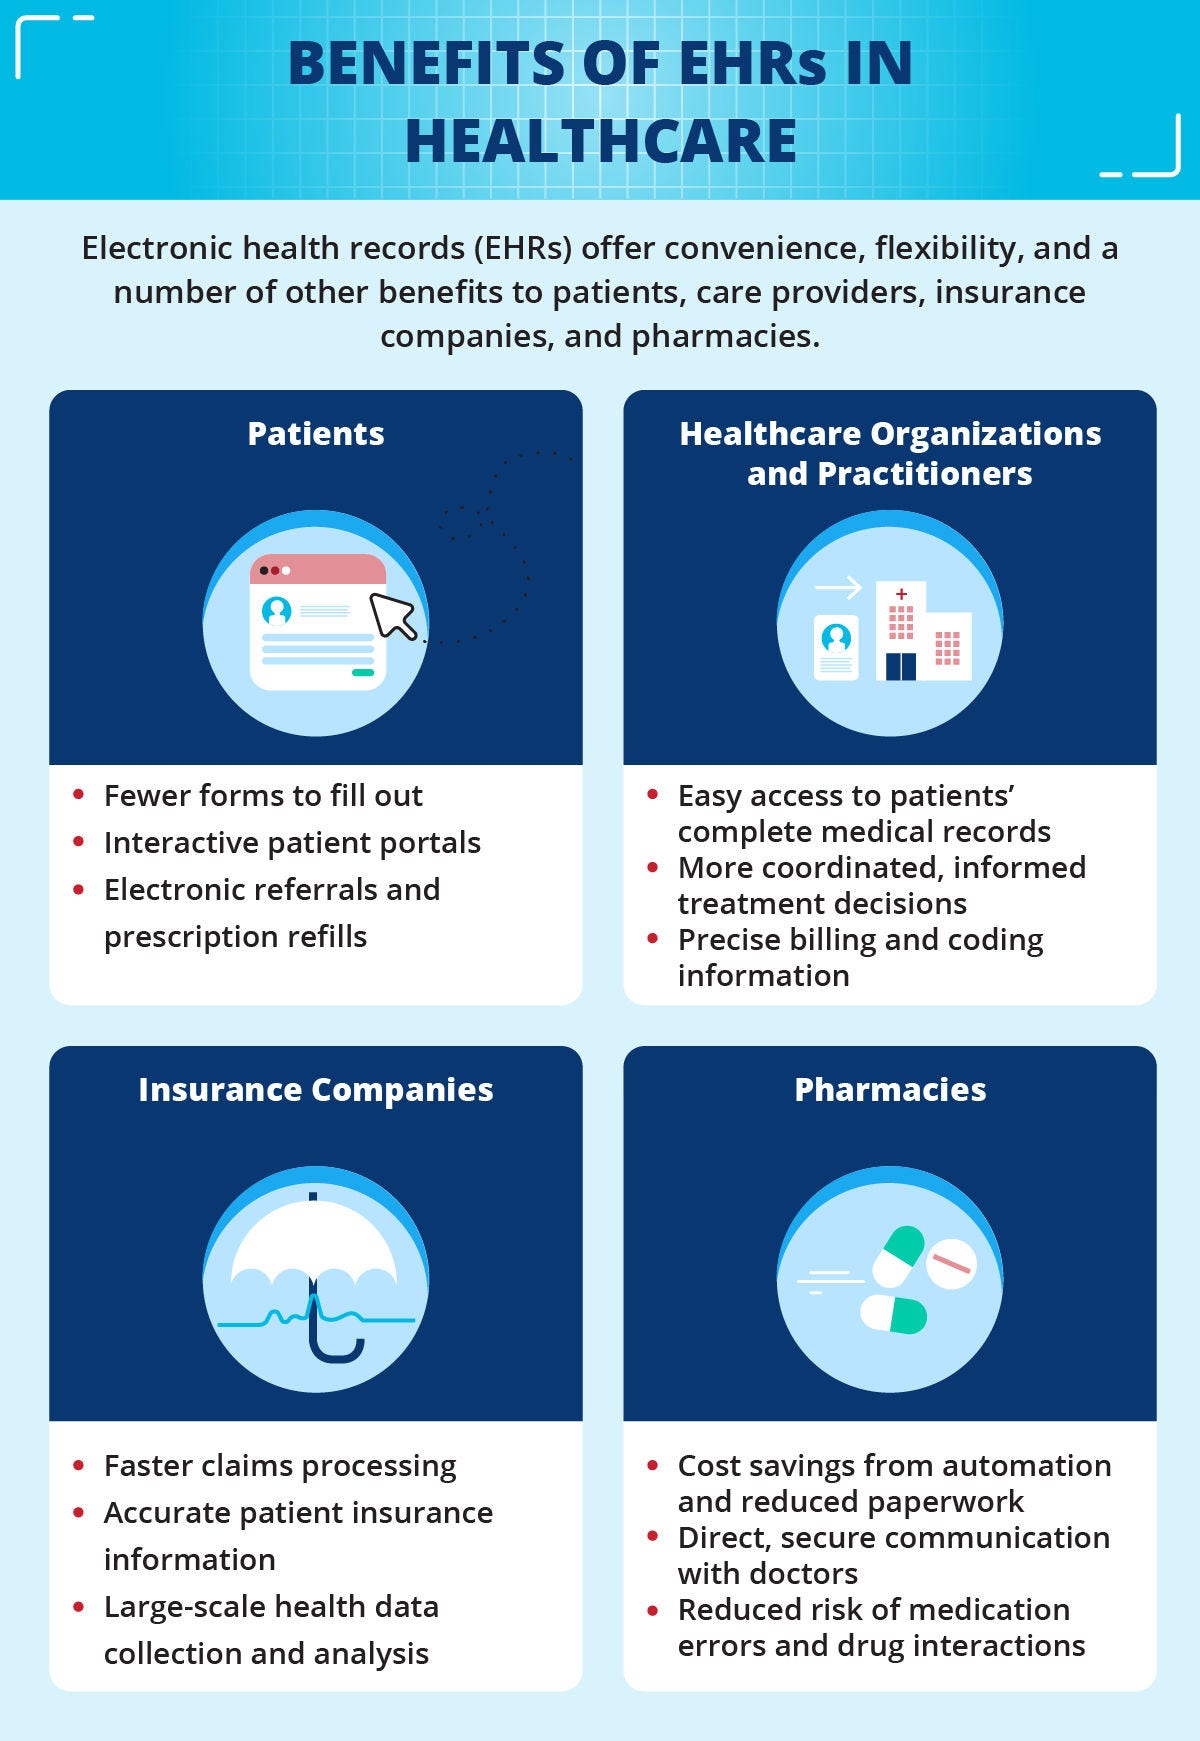 Benefits of EHRs in healthcare.